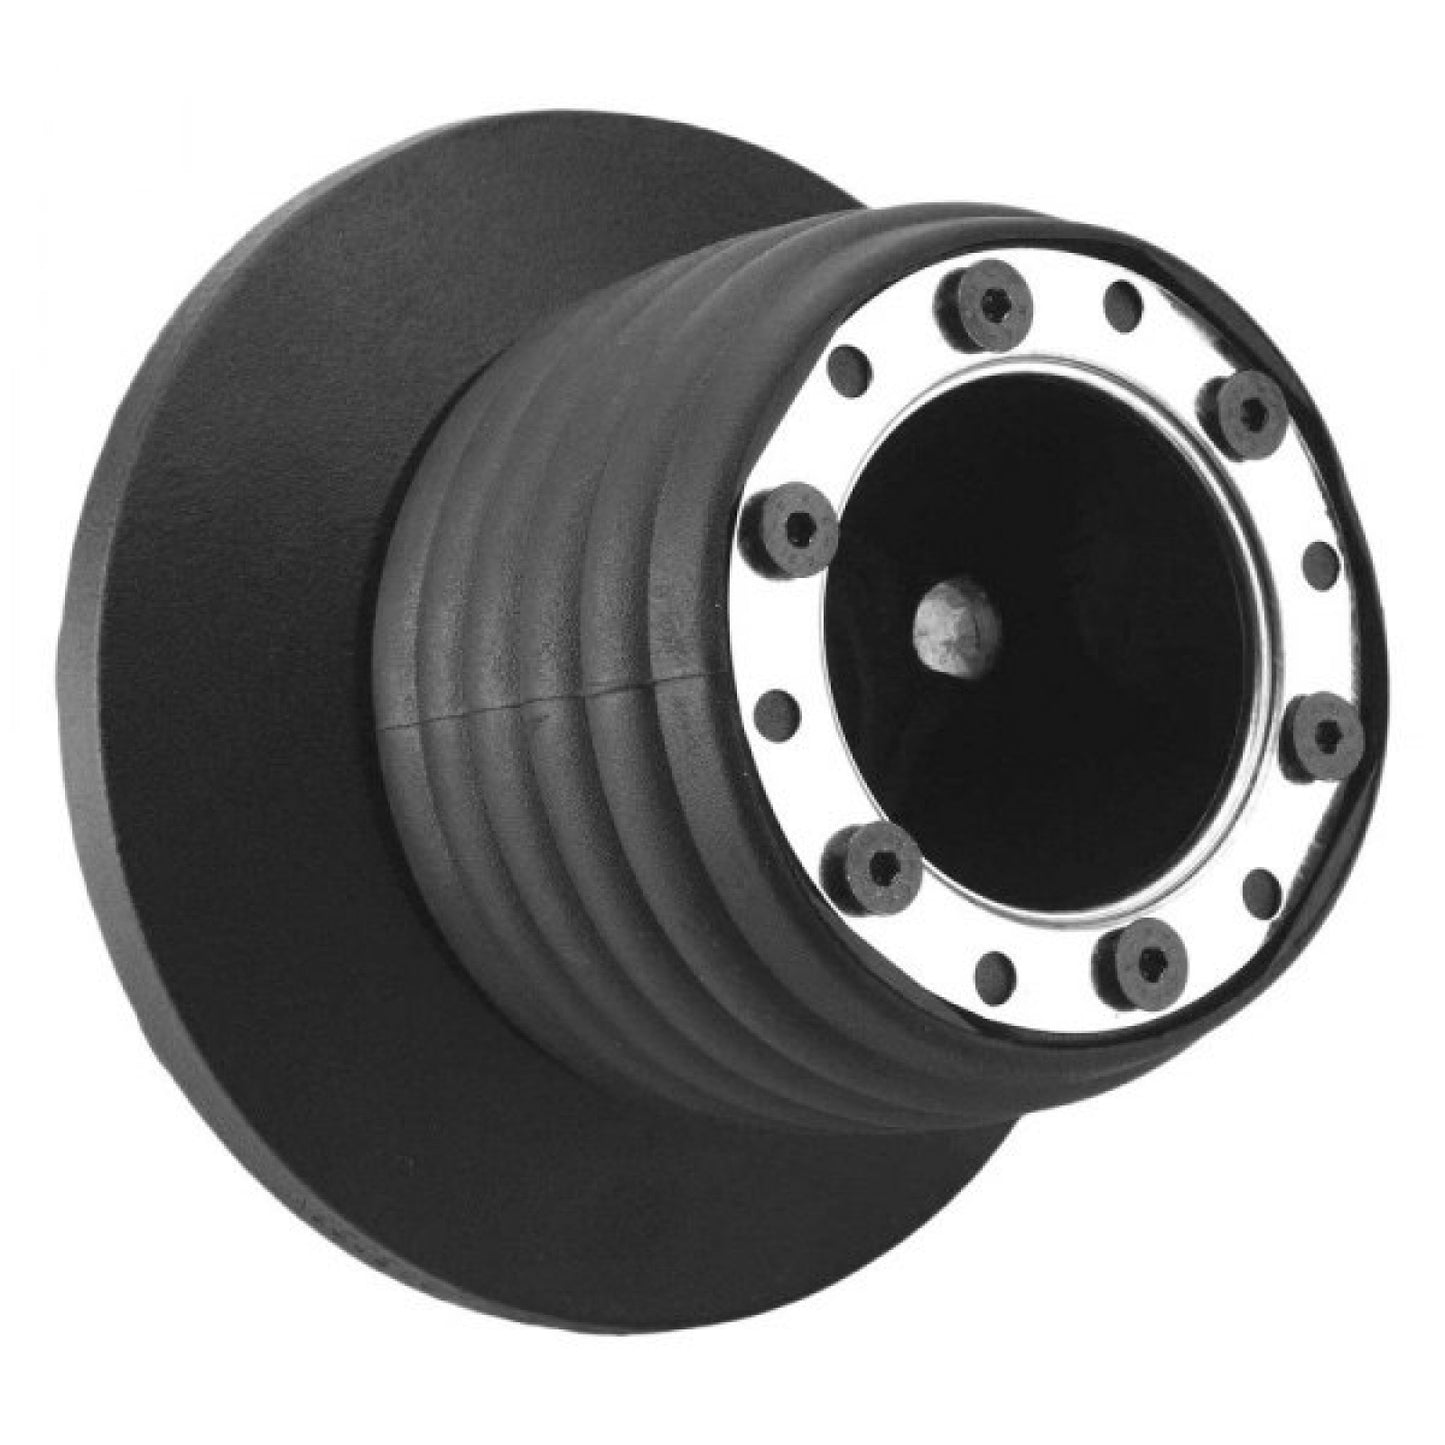 OMP Steering Wheel Hub for Ford Mustang and Ford Pickups OD-1960FO862